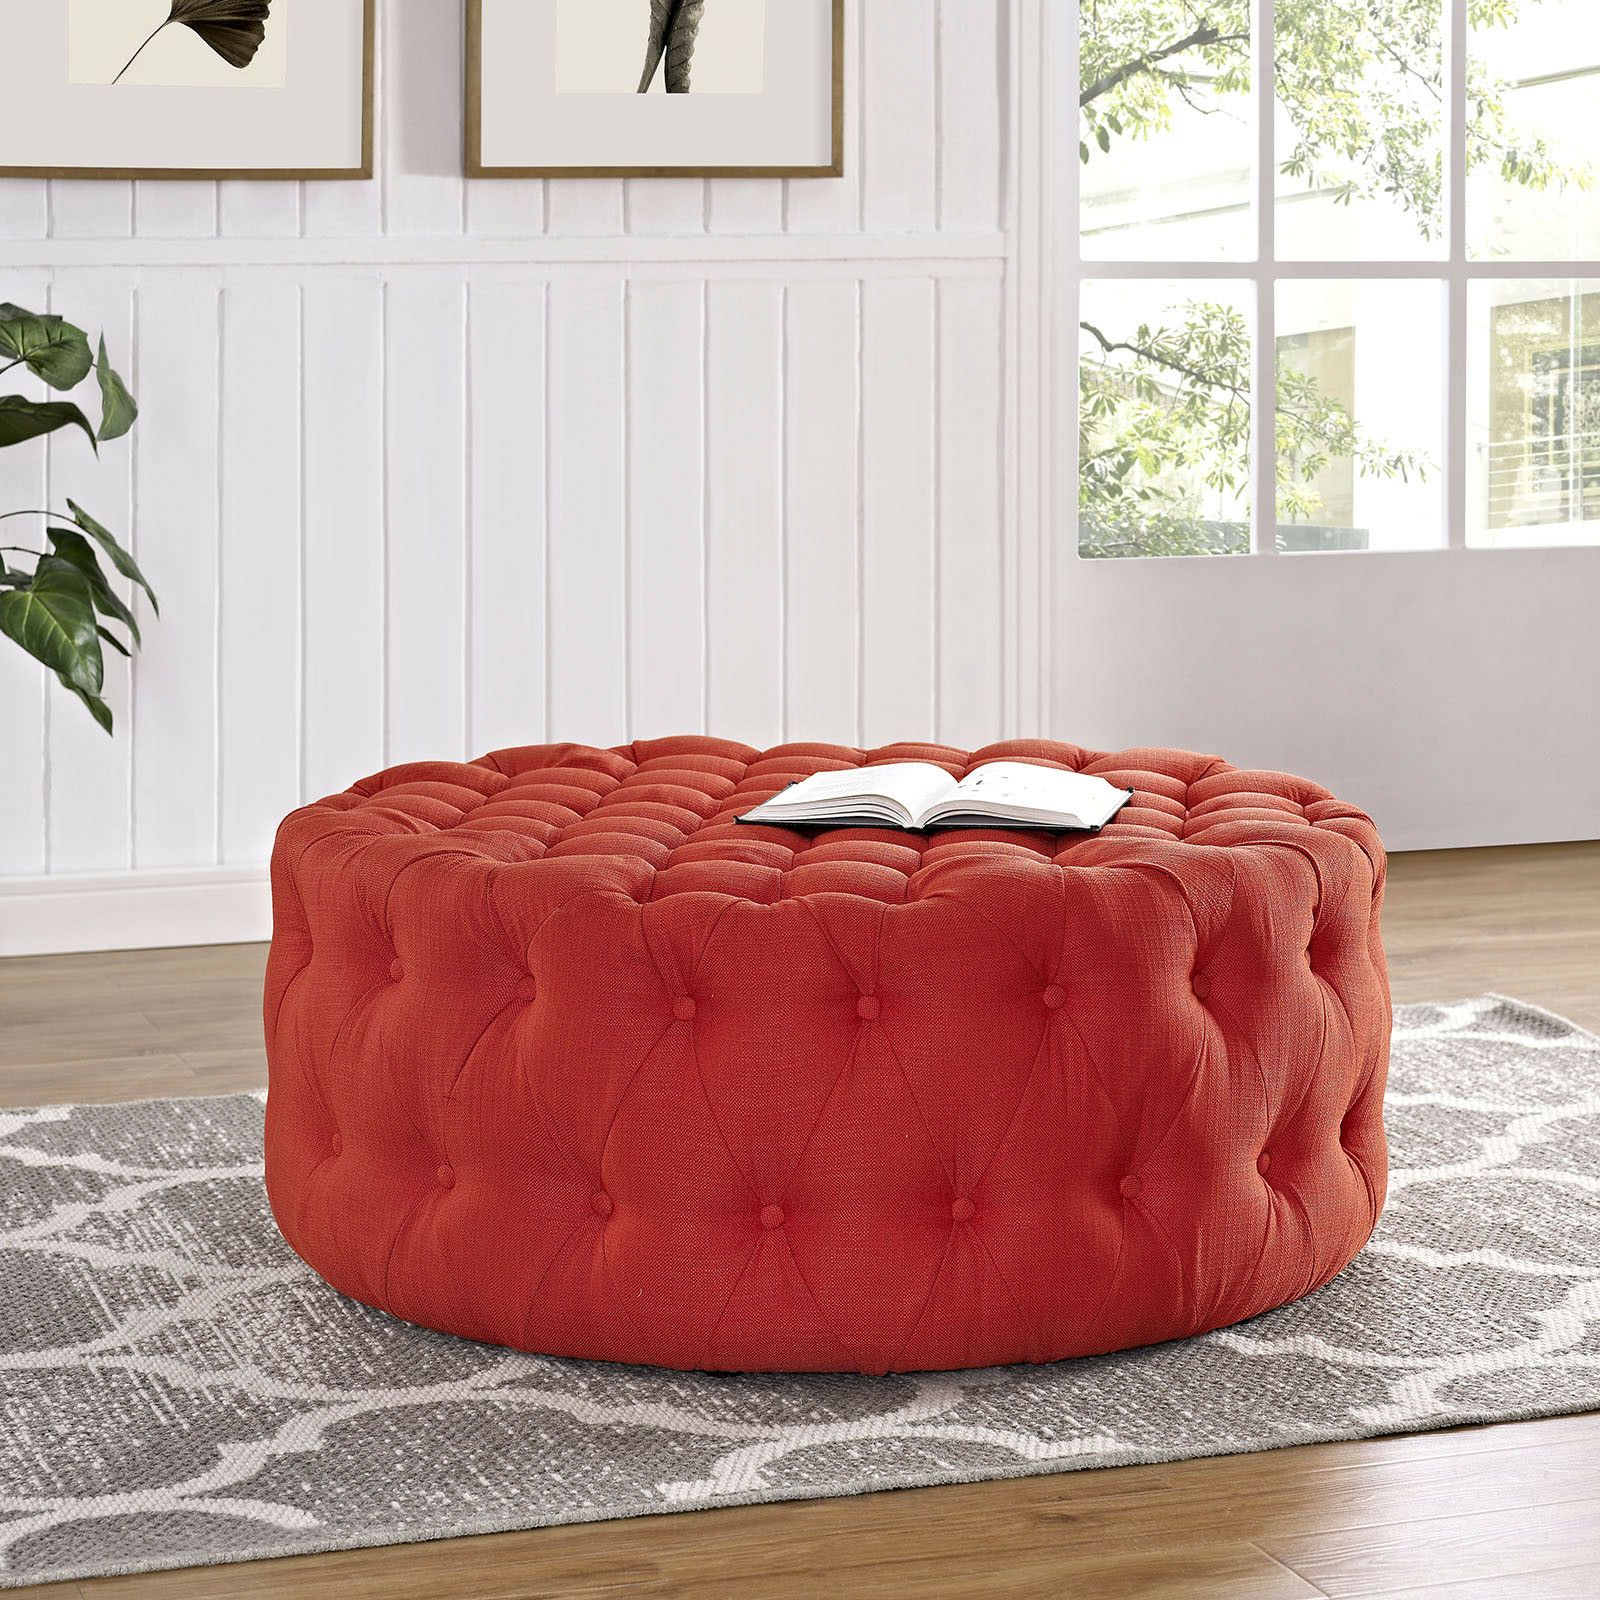 2017 Fabric Oversized Pouf Ottomans Pertaining To Button Tufted Fabric Upholstered Round Ottoman In Atomic Red (View 5 of 10)